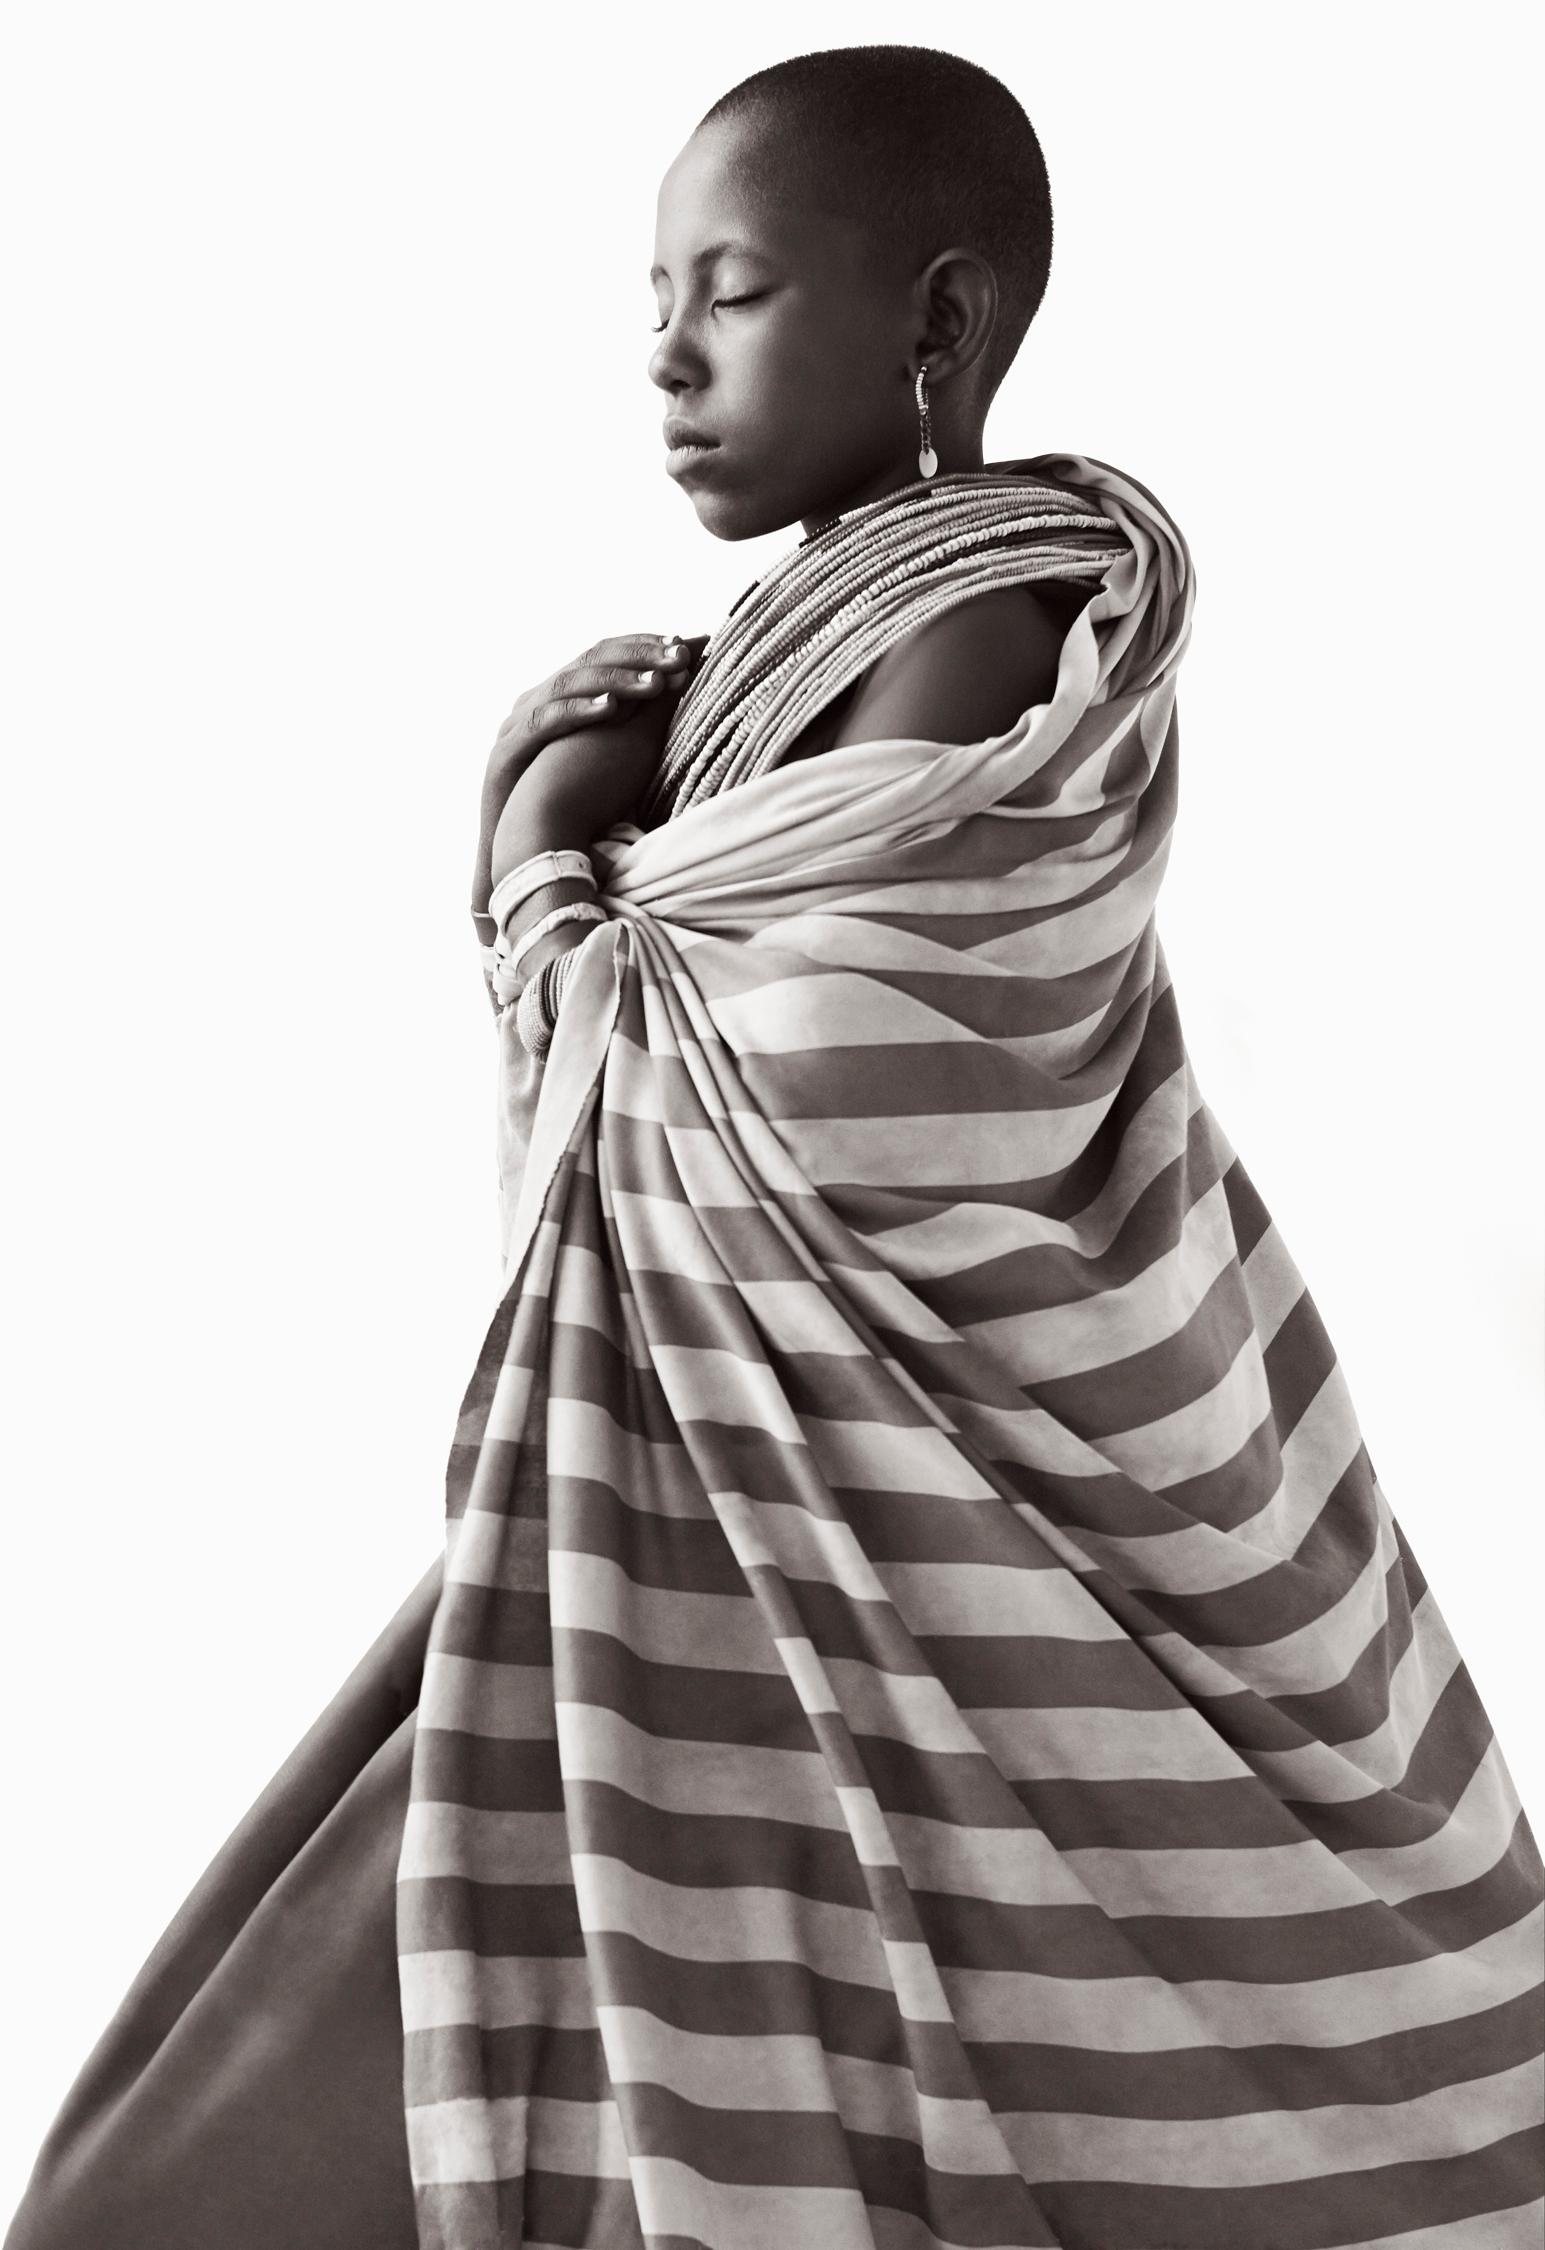 Drew Doggett Black and White Photograph - Adato, a young Rendille woman, is a vision of calmness and tranquility.